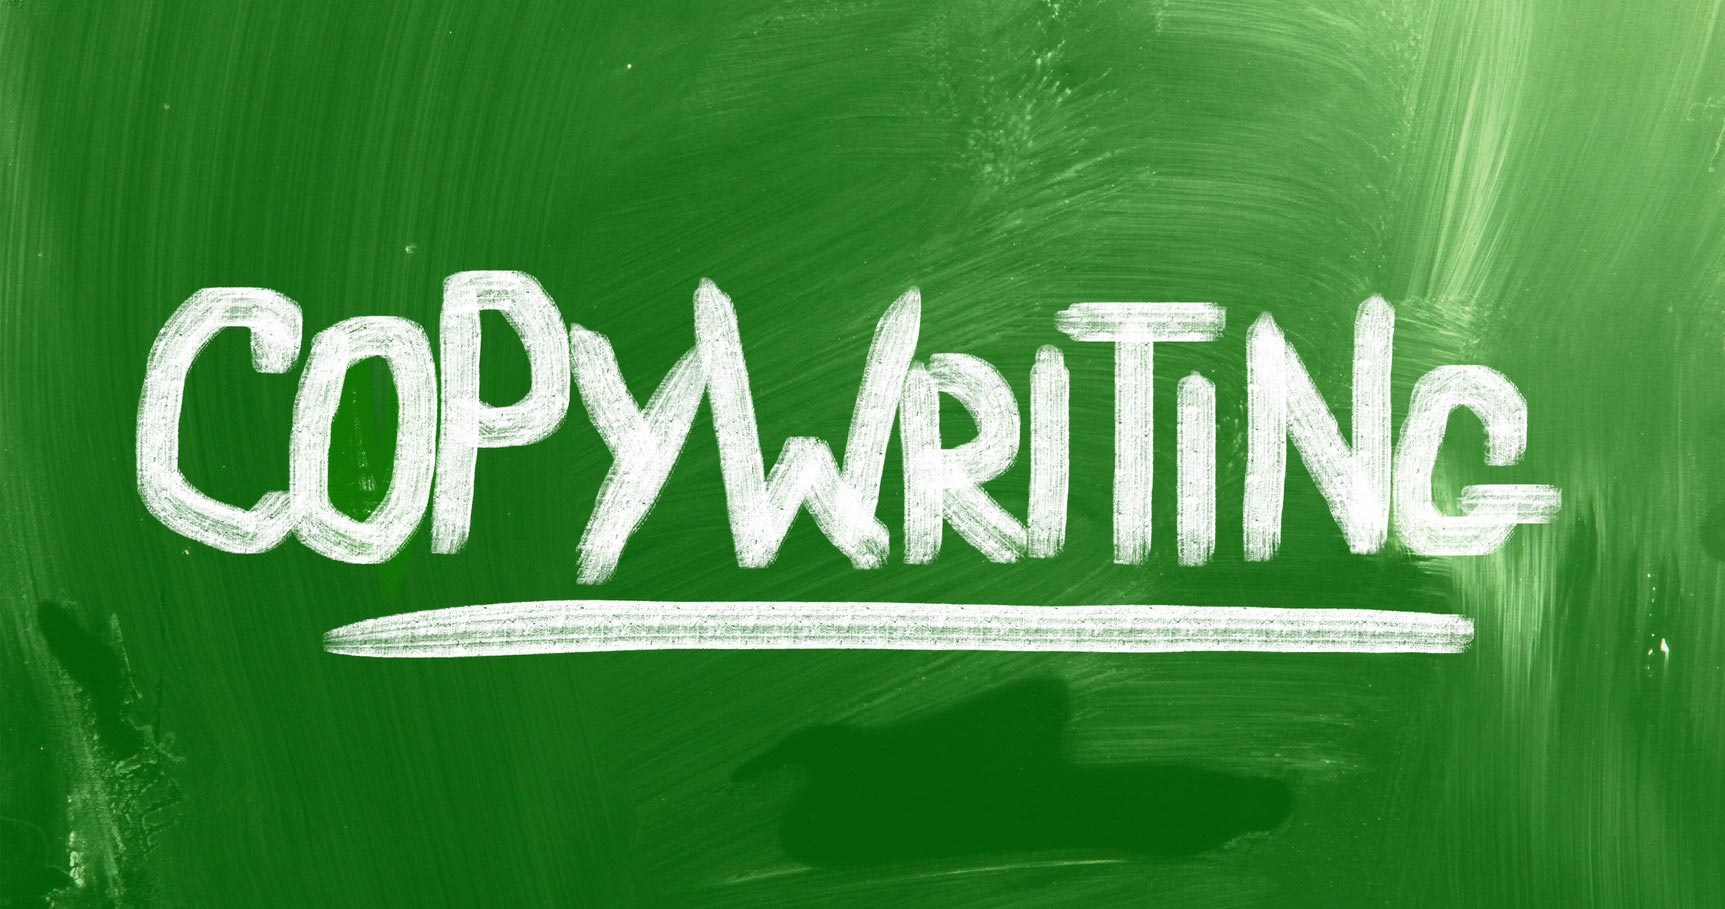 keeping copywriting within the business